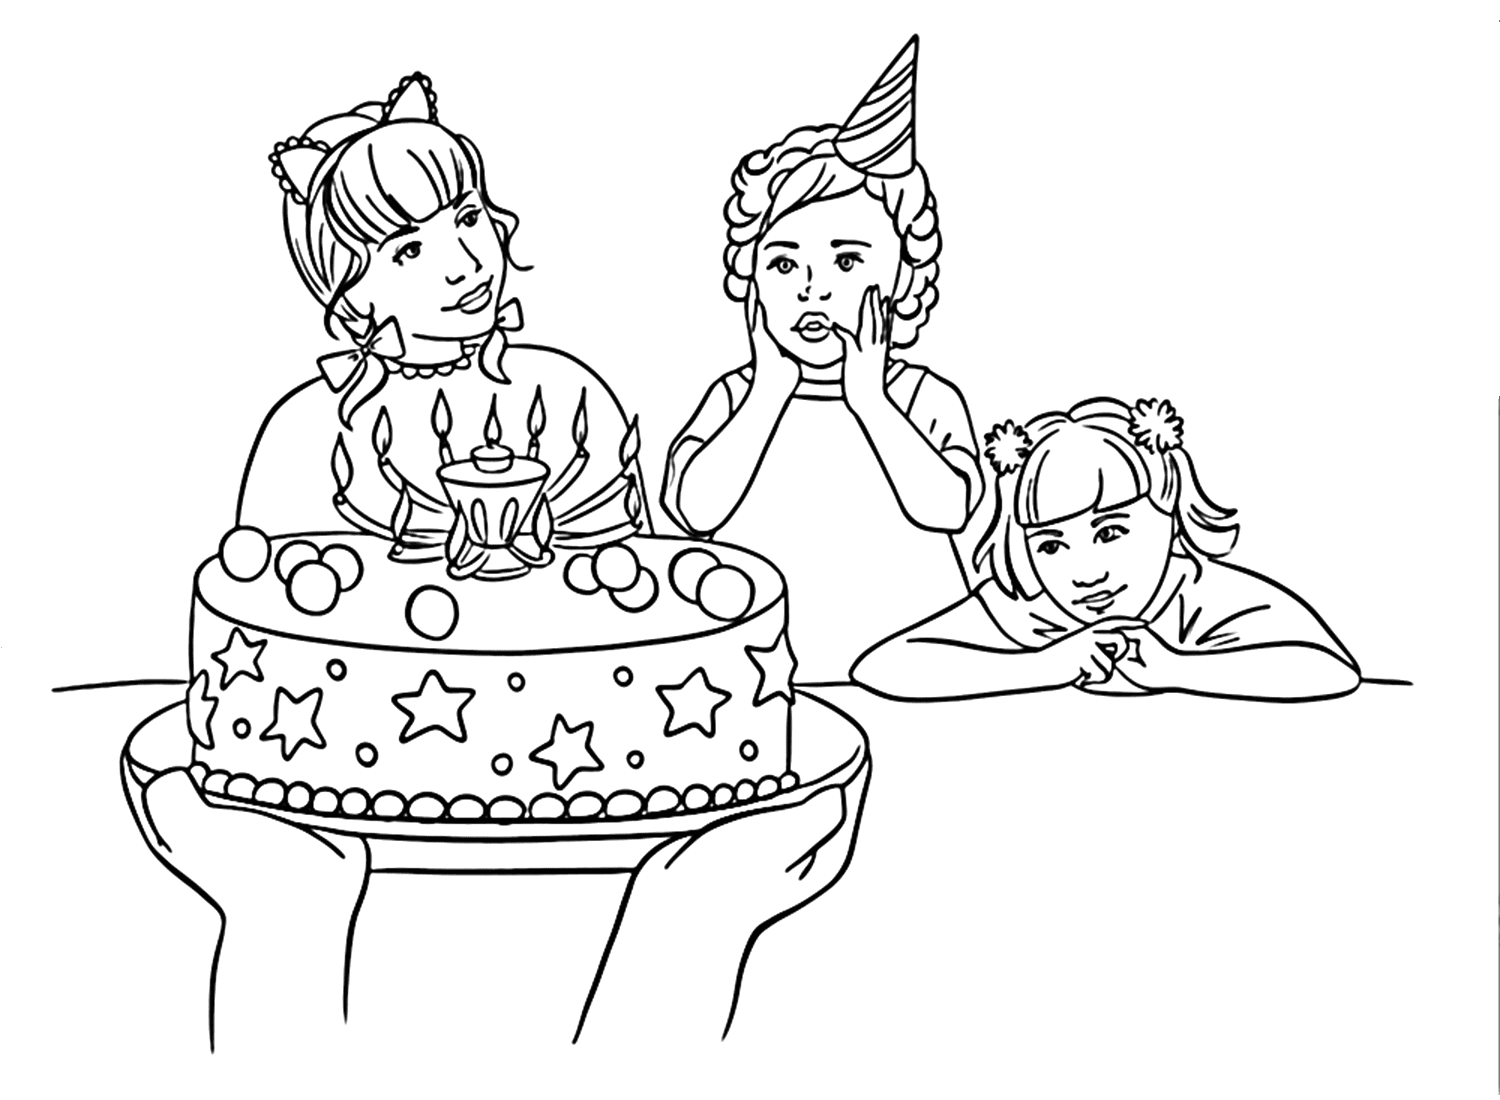 Cake On Sisters Day Coloring Page from Sisters Day